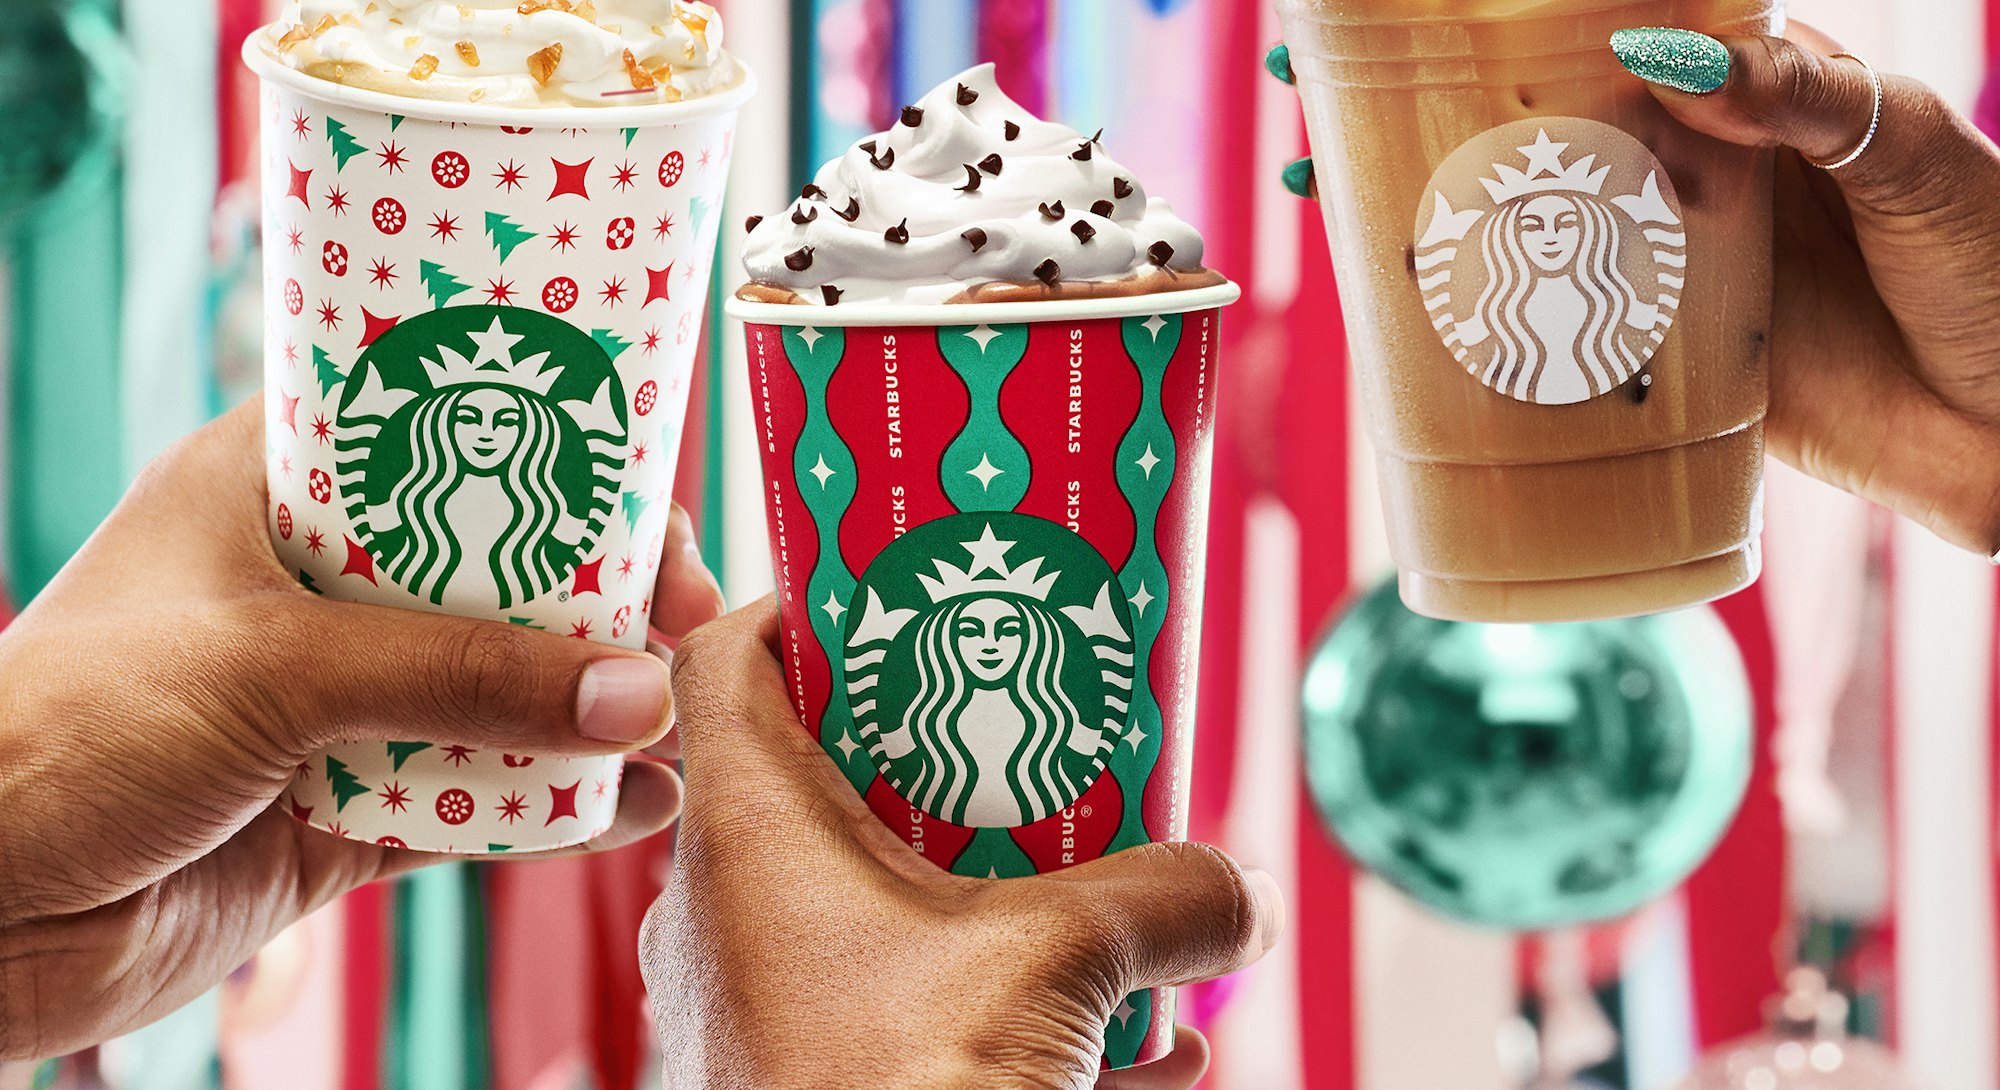 The 2022 Starbucks holiday drink lineup includes classic favorites like Peppermint Mocha latte and I...